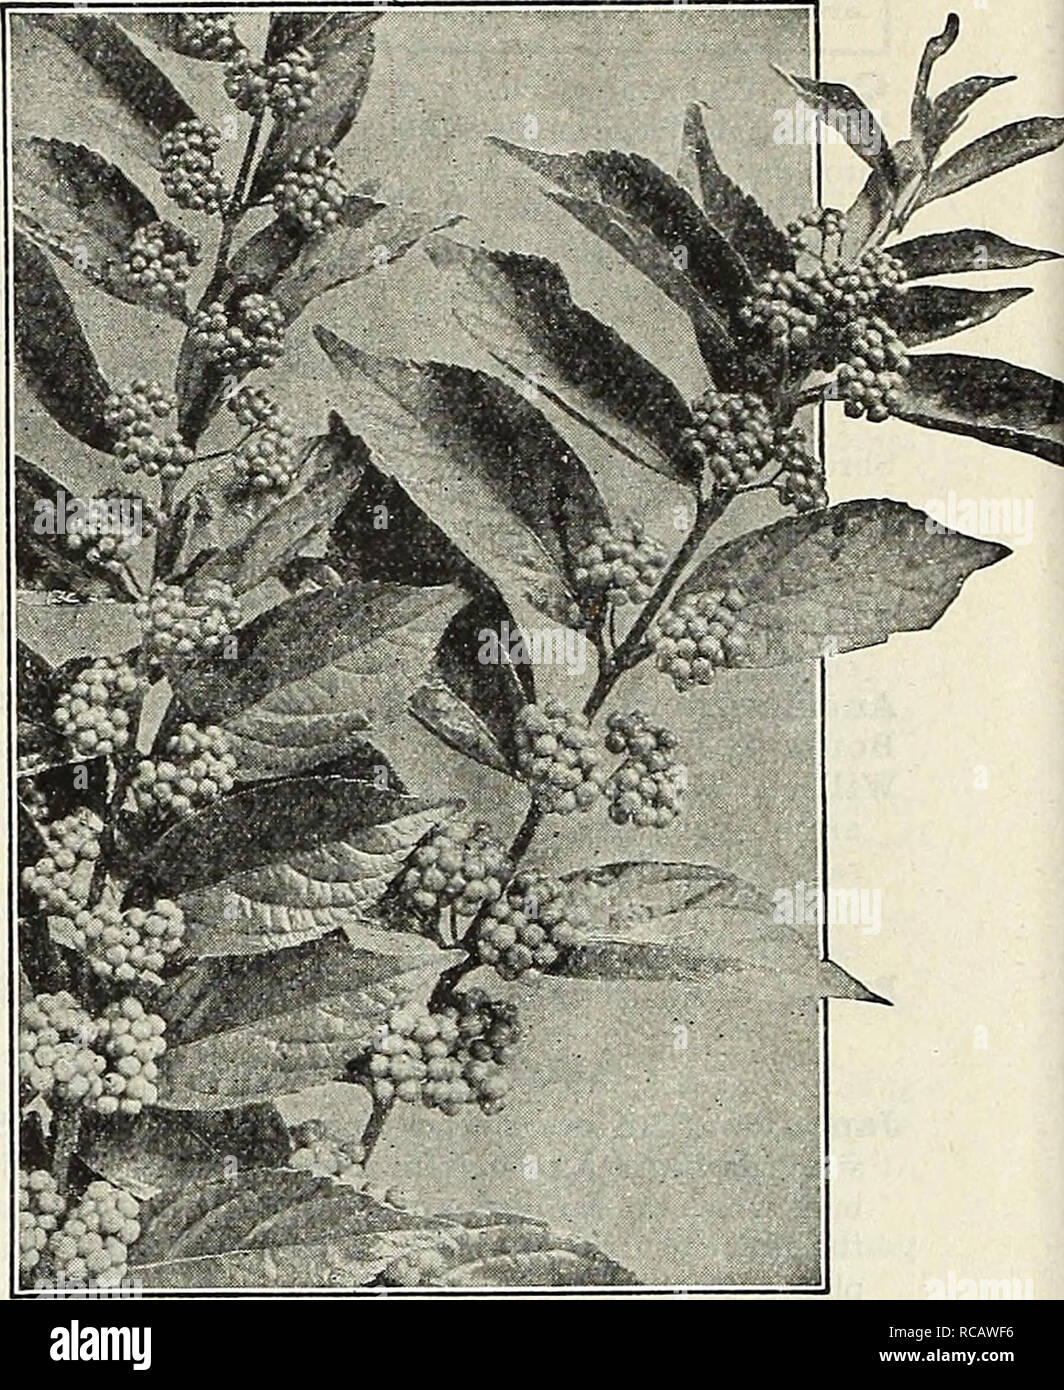 . Dreer's autumn catalogue 1931. Bulbs (Plants) Catalogs; Flowers Seeds Catalogs; Gardening Equipment and supplies Catalogs; Nurseries (Horticulture) Catalogs; Vegetables Seeds Catalogs. 64 /flEM-DREE);. 3Min^I&gt;HB«!llil Callicarpa (Beauty Berry) Purpurea. A splendid berried Shrub for the border or planted in clumps on the lawn; it grows about 3 feet high, its branches gracefully recurving are covered in August with tiny pink-tinted flowers, followed in late September by great masses of violet-purple berries, which remain on the plant until mid-winter. All fall berried plants are useful and  Stock Photo